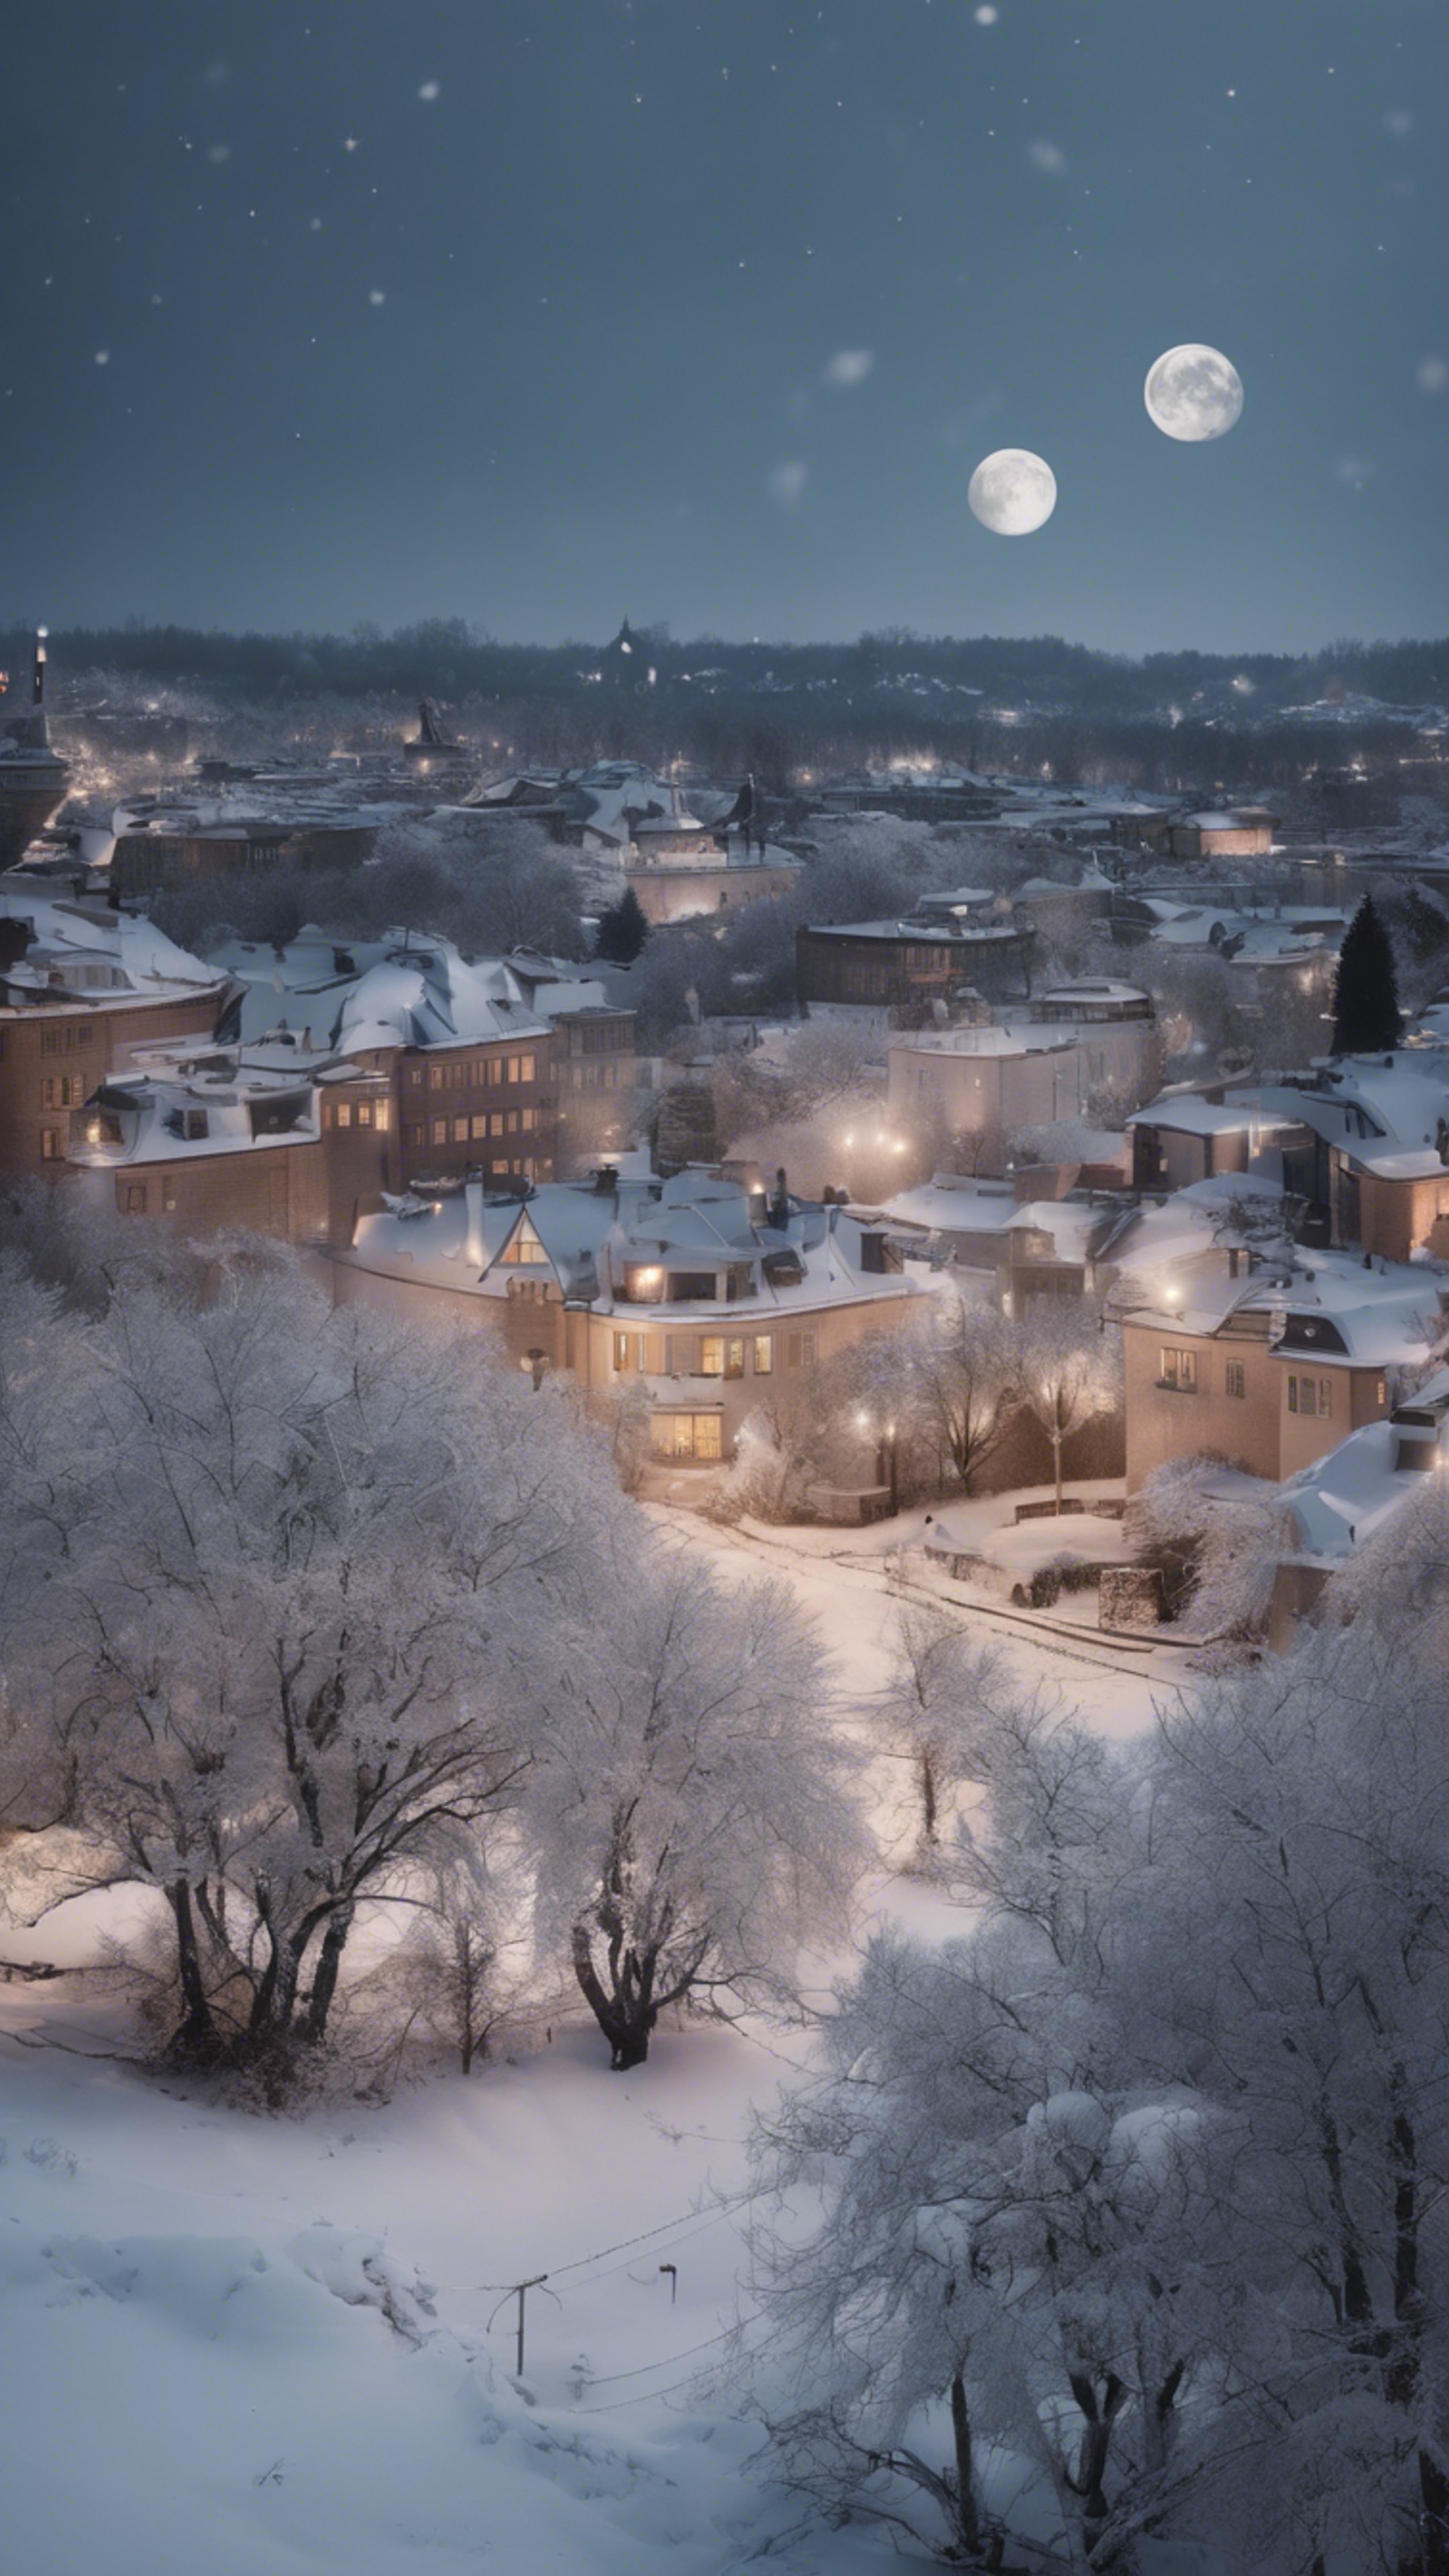 A snowy winter scene, the rooftops and trees covered by cool white snow, the moon casts a silvery glow on the serene town. Sfondo[b59119720f8642b39e1c]